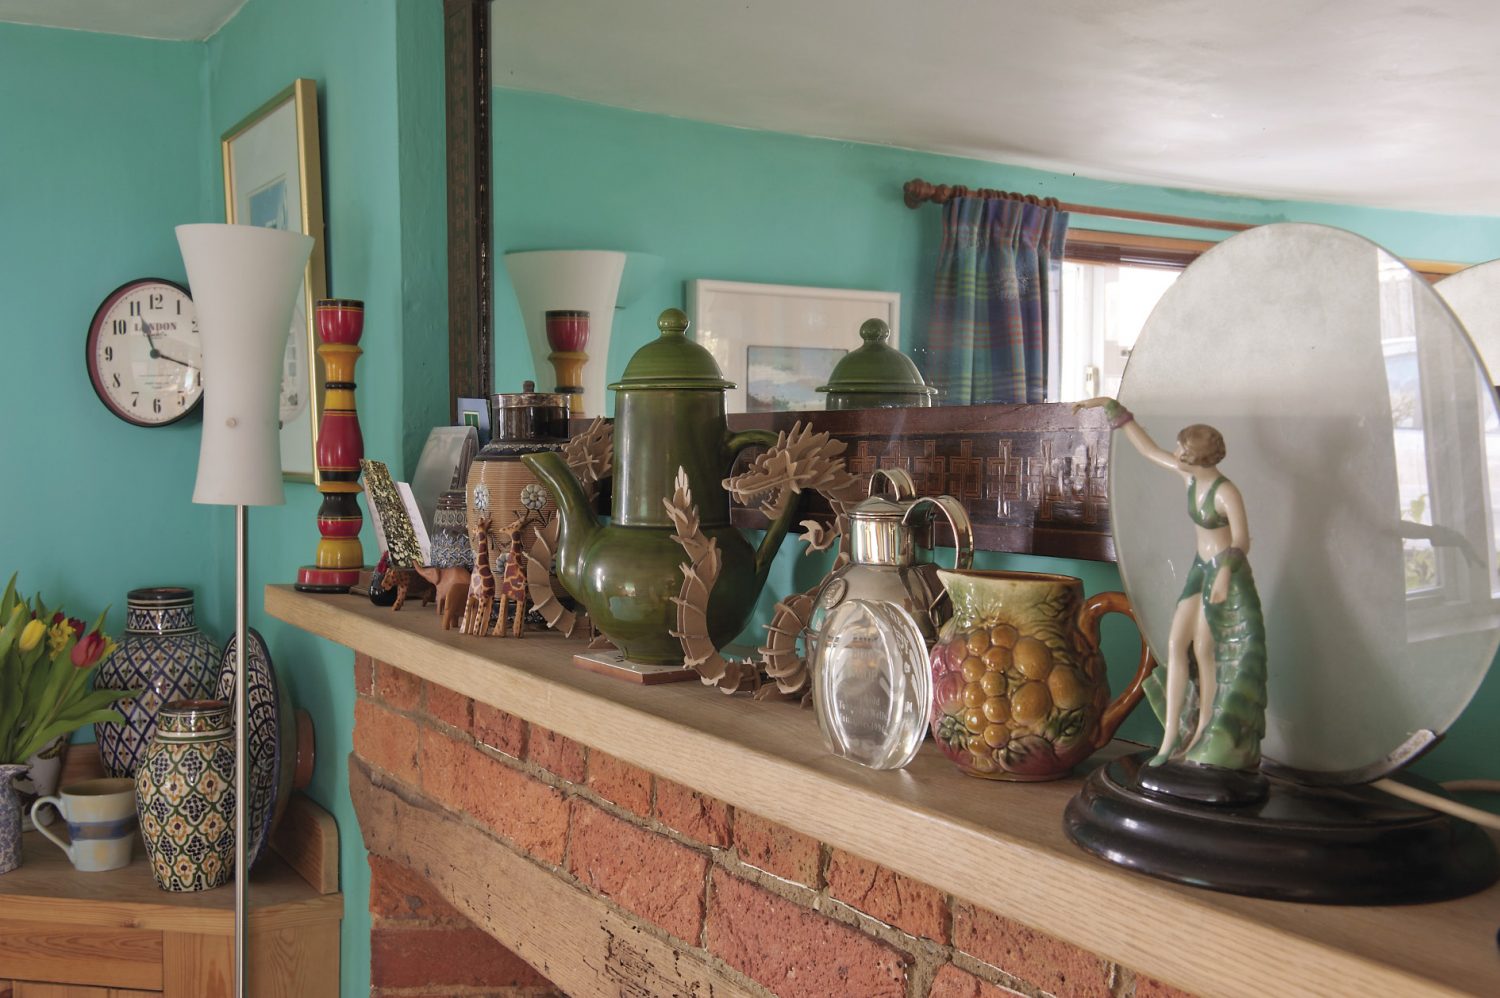 A long mirror with an inlaid wooden frame hangs above the fireplace. The mantelpiece is home to an Arts & Crafts Doulton jug, an olive green lidded pot brought back from a trip to France, a collection of painted wooden African animals and a pair of vibrant candlesticks